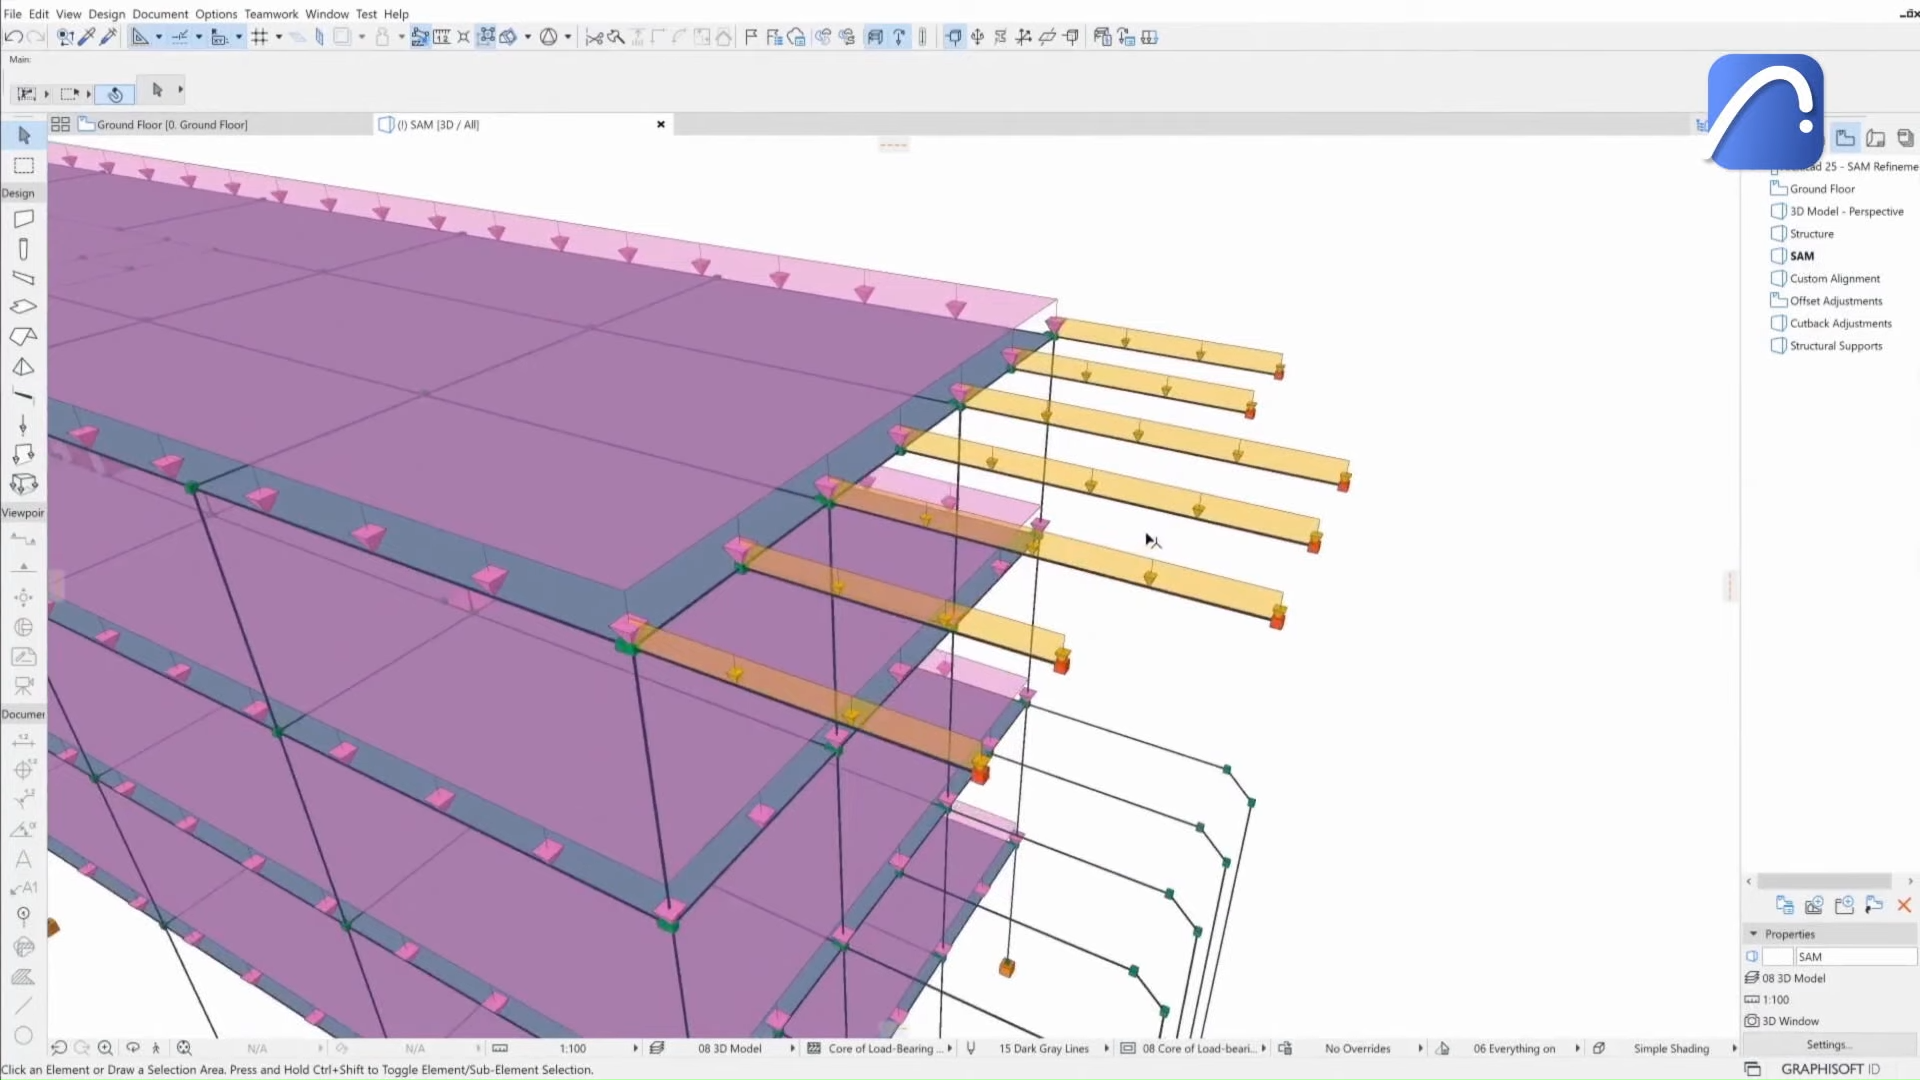 graphisoft archicad 25 download